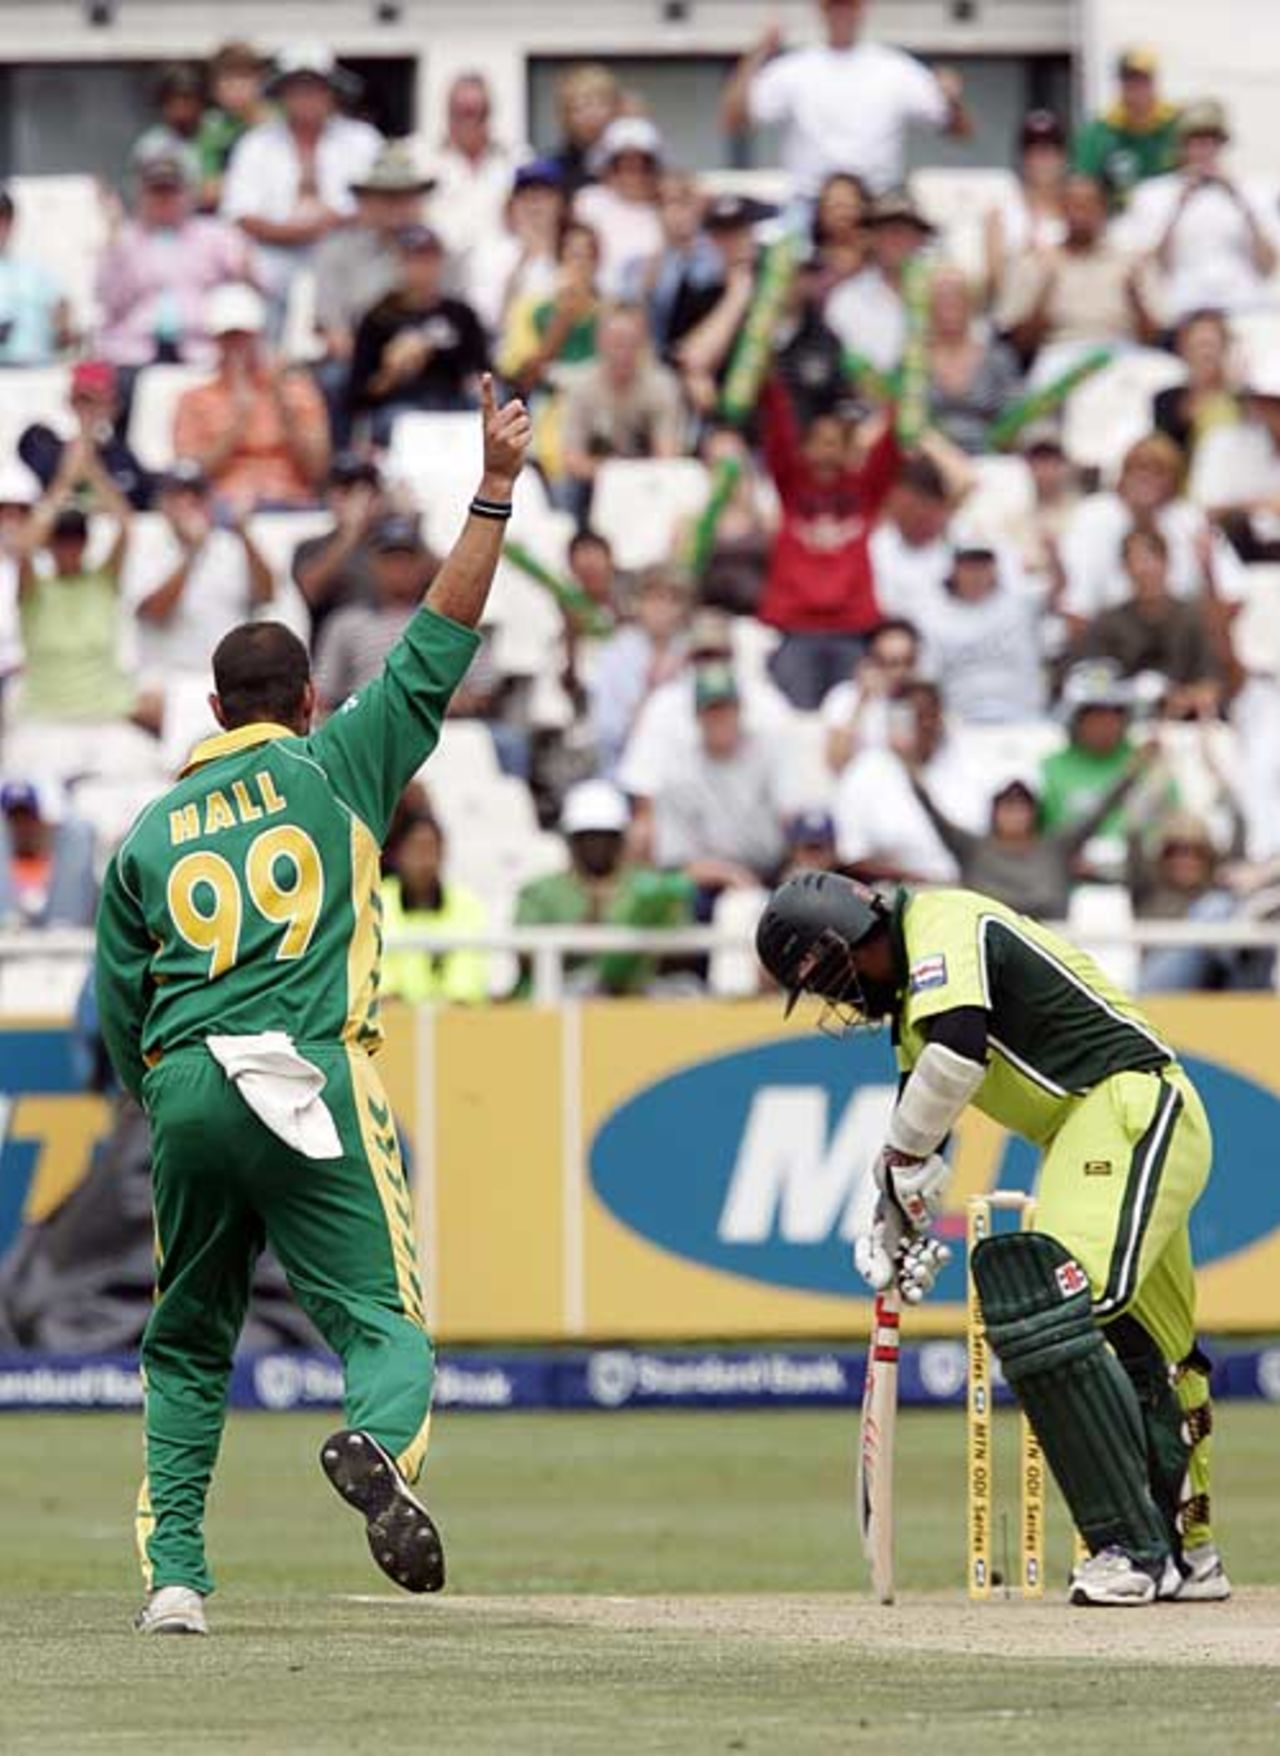 Mohammad Yousuf falls to Andrew Hall, South Africa v Pakistan, 4th ODI, Cape Town, February 11, 2007